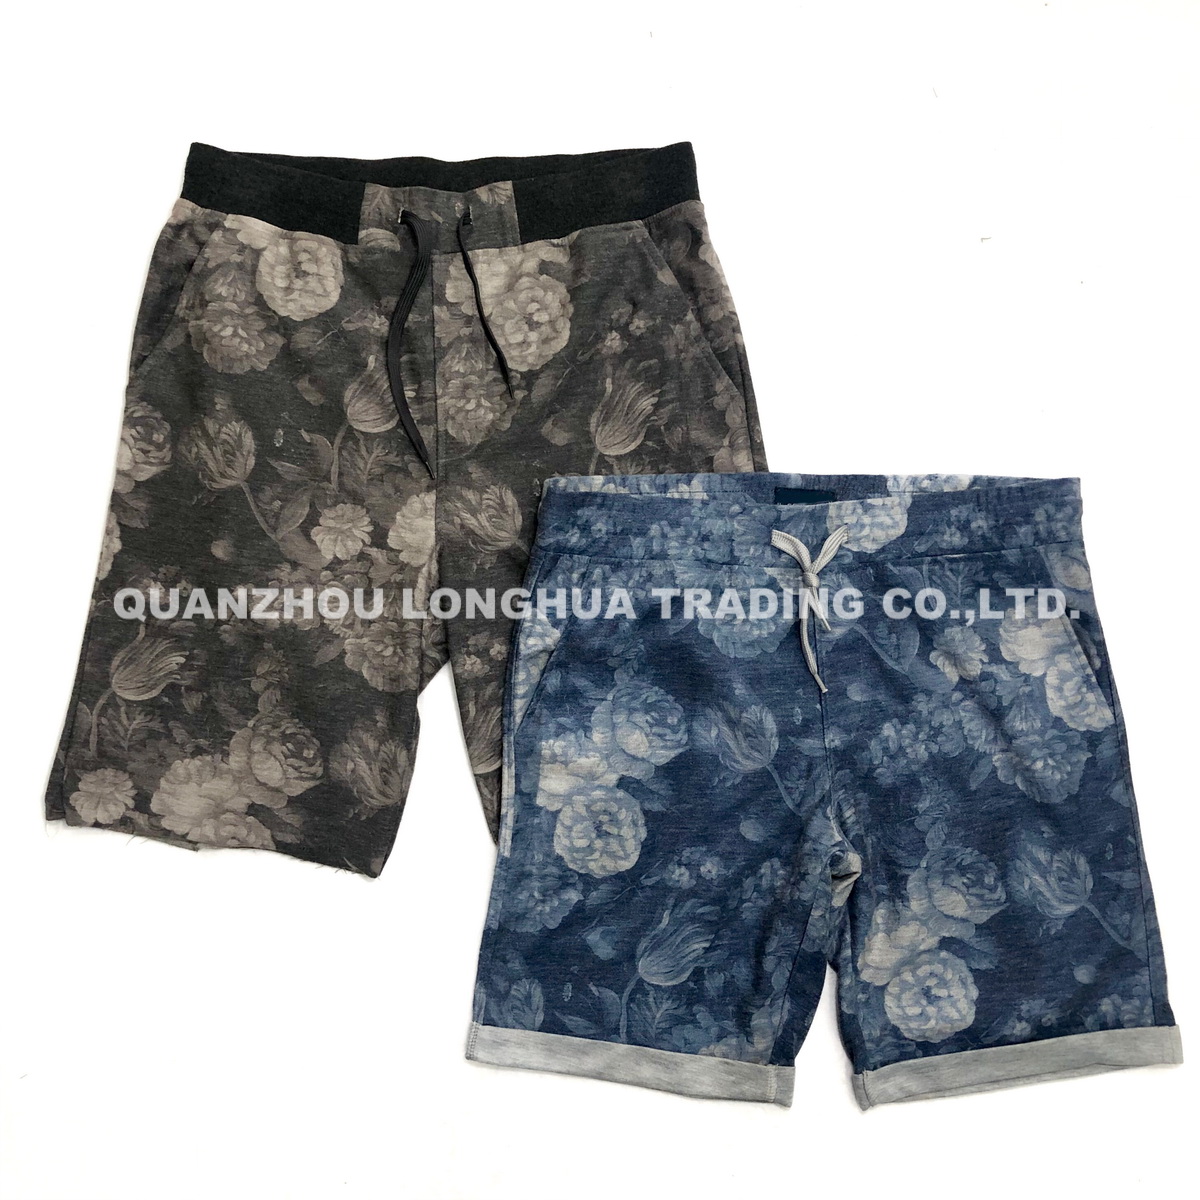 Men and Boys Shorts With Printing Apparel Casual Trousers Jeans Kids Wear Pants Knitwear T/C Terry